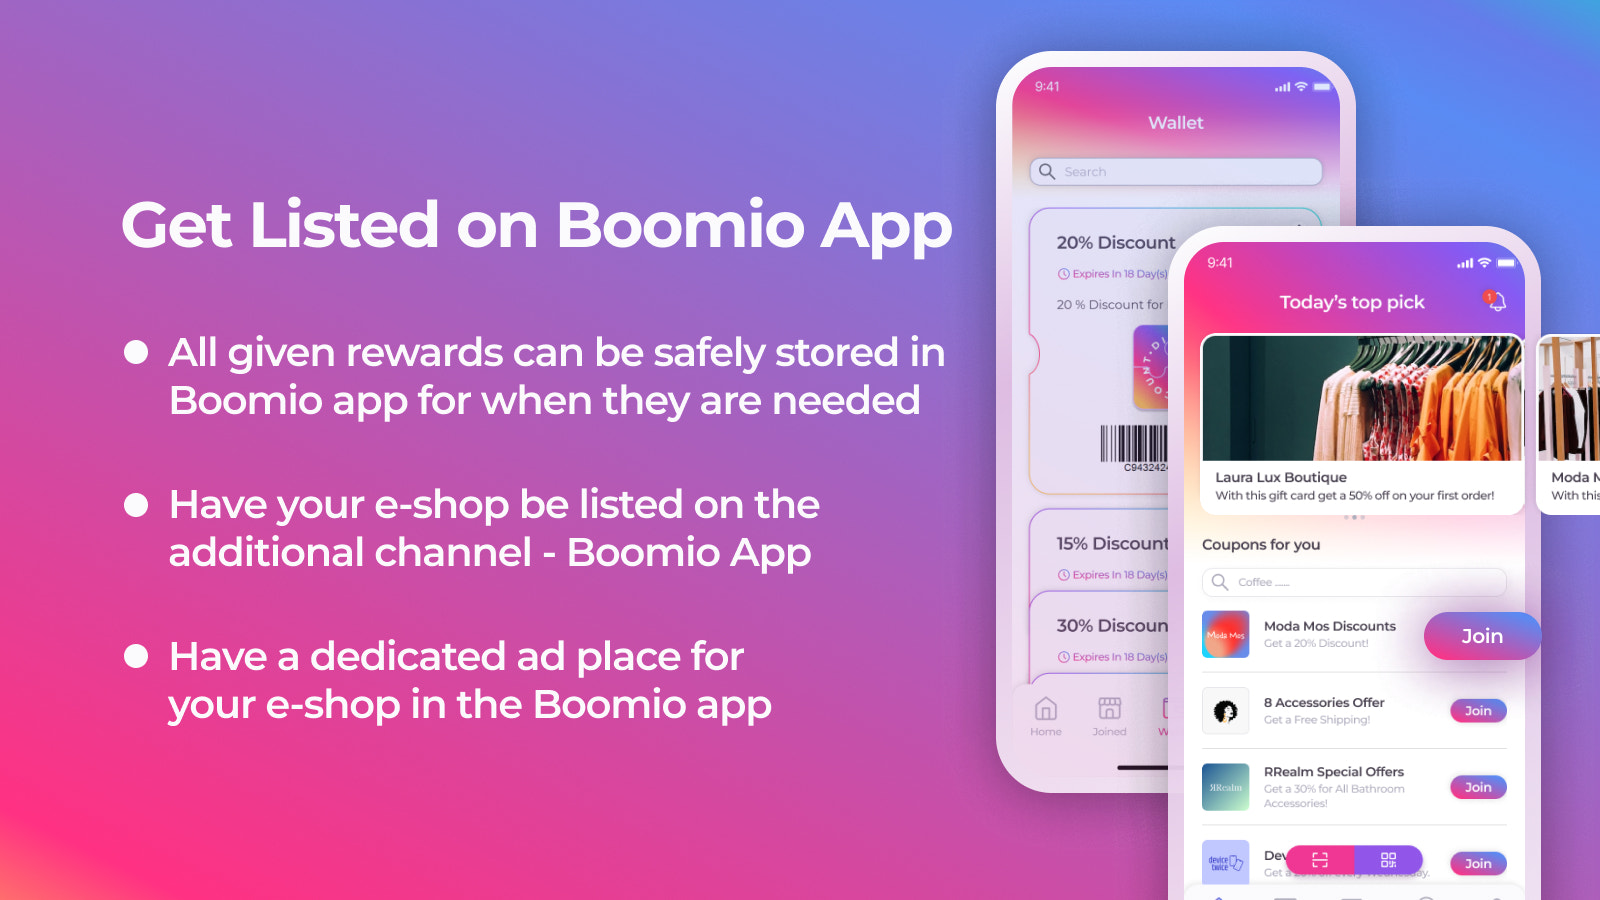 Get your e-shop listed on Boomio App.